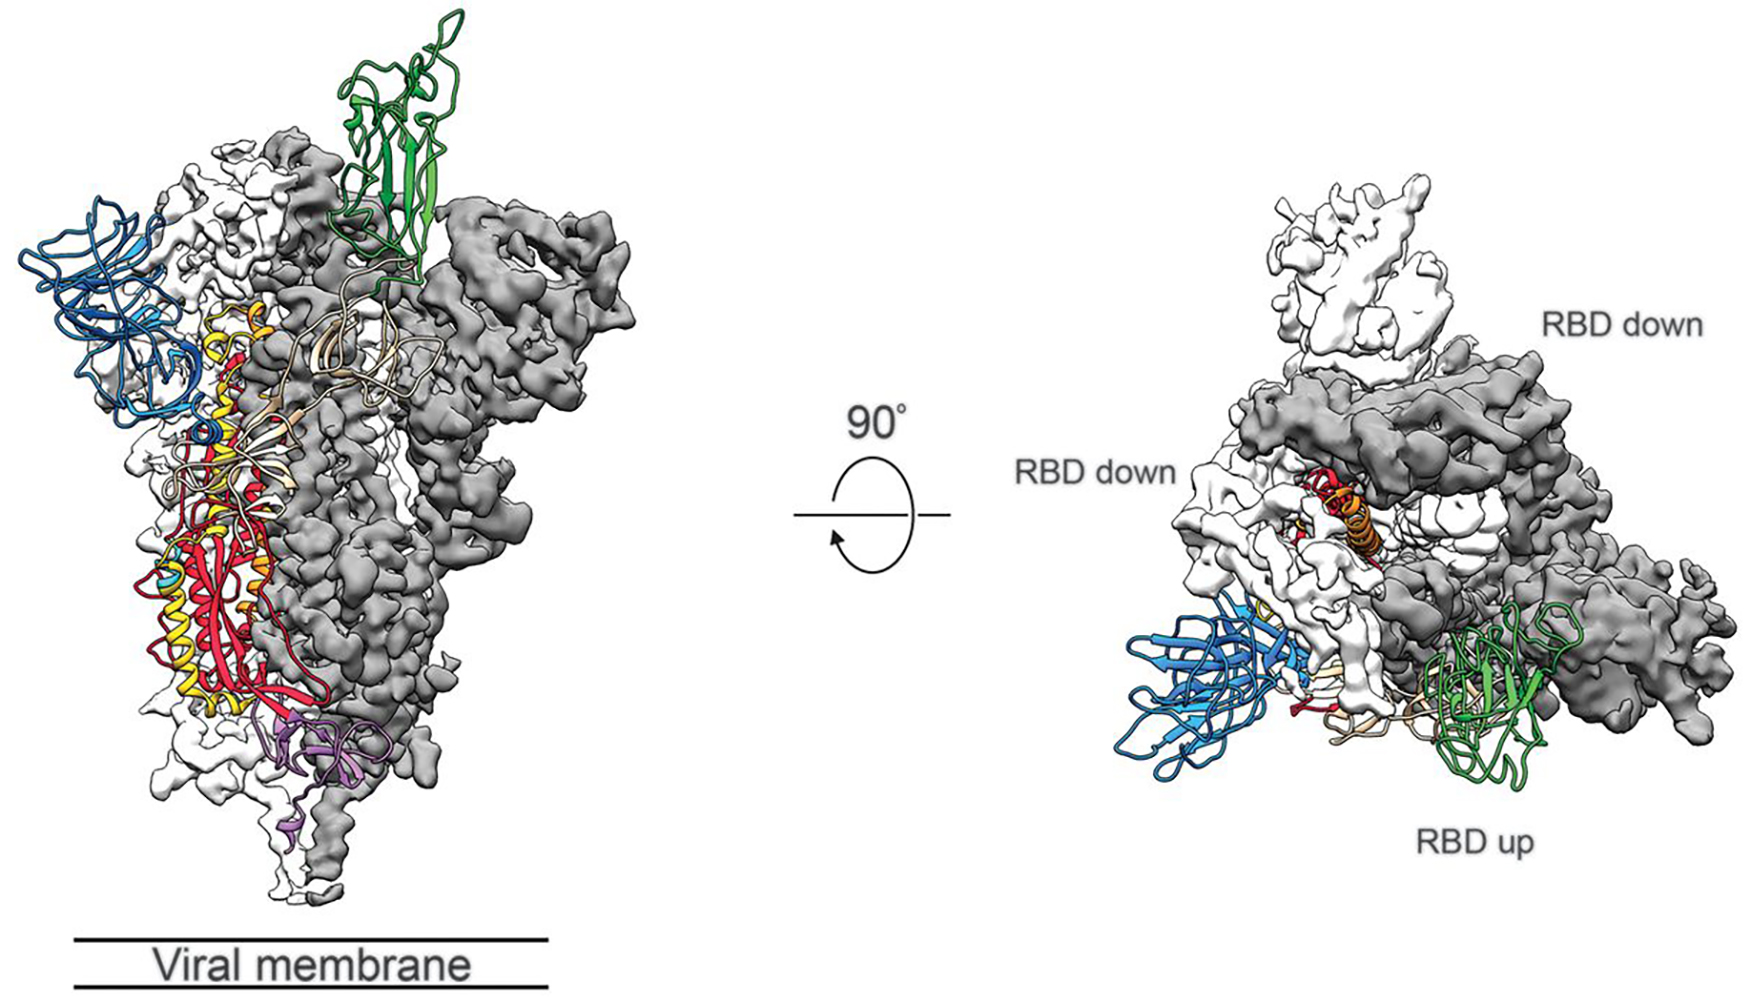 Protein Structure Analysis Using Single Particle Cryo-EM for Coronavirus Research